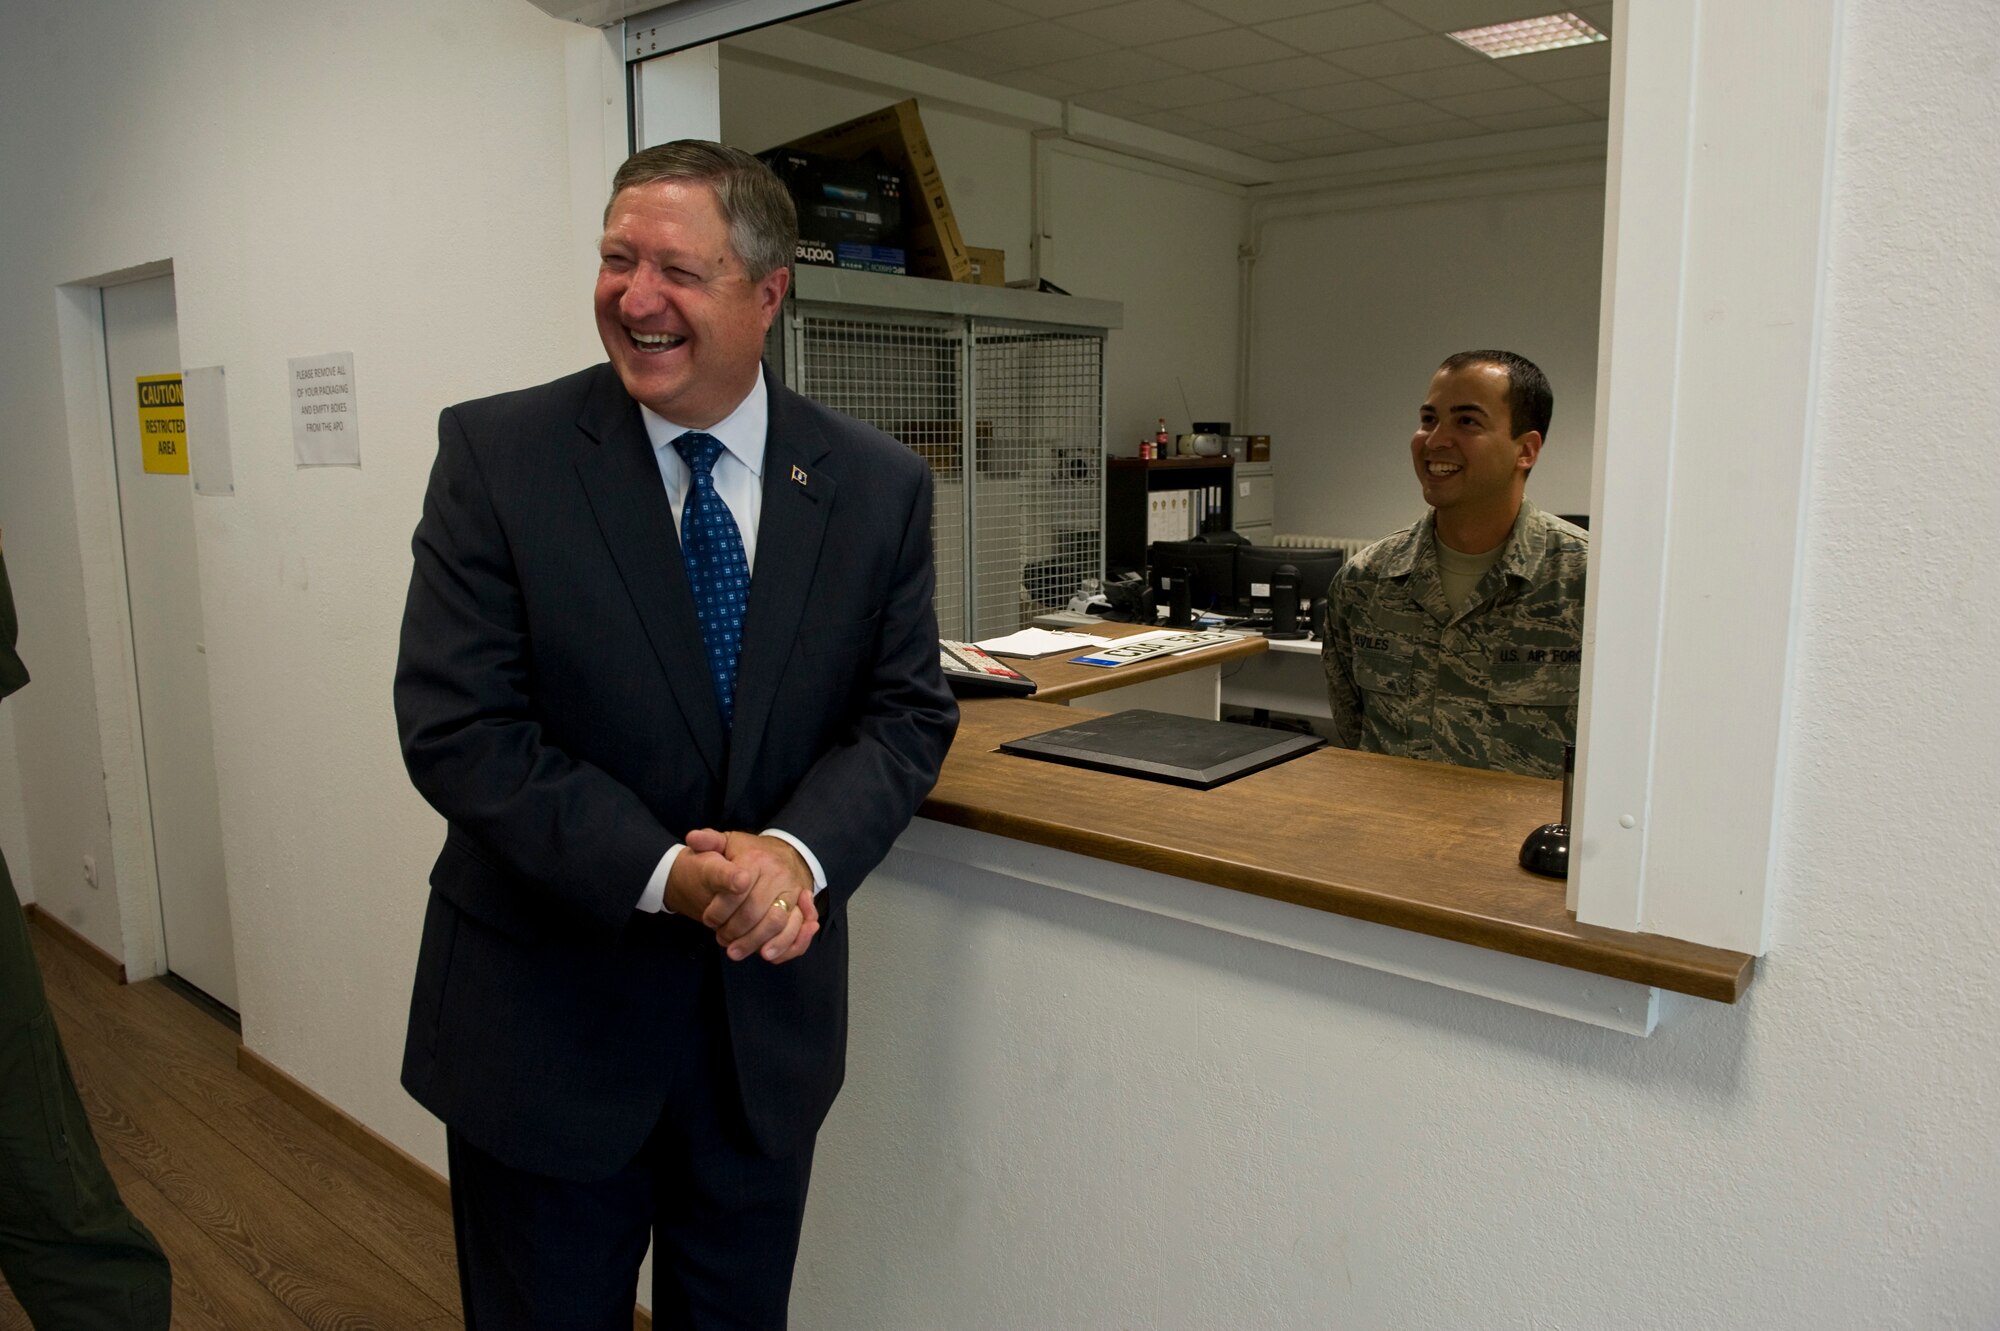 Secretary of the Air Force Michael Donley shares a laugh with Staff Sgt. Jose Aviles, Heavy Airlift Wing postmaster, at Pápa Air Base, Hungary, July 11, 2012. The secretary visited the HAW to speak with Airmen about the direction of the Air Force, meet with them on the job and pay personal attention to the service members. (U.S. Air Force photo/Master Sgt. Wayne Clark)